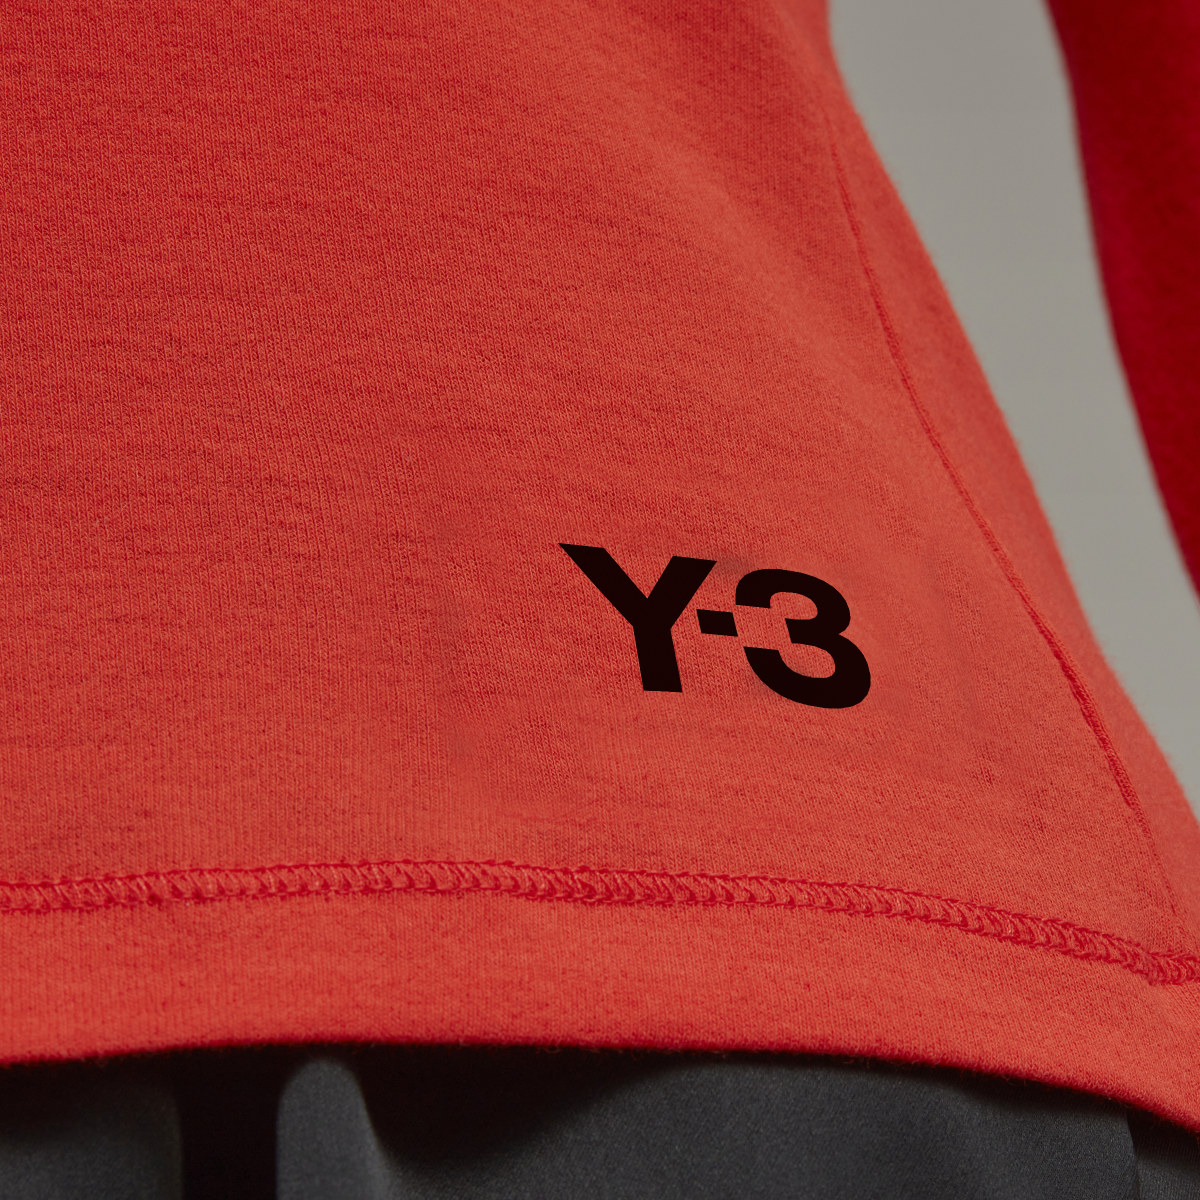 Adidas Y-3 Fitted Long Sleeve Tee. 7